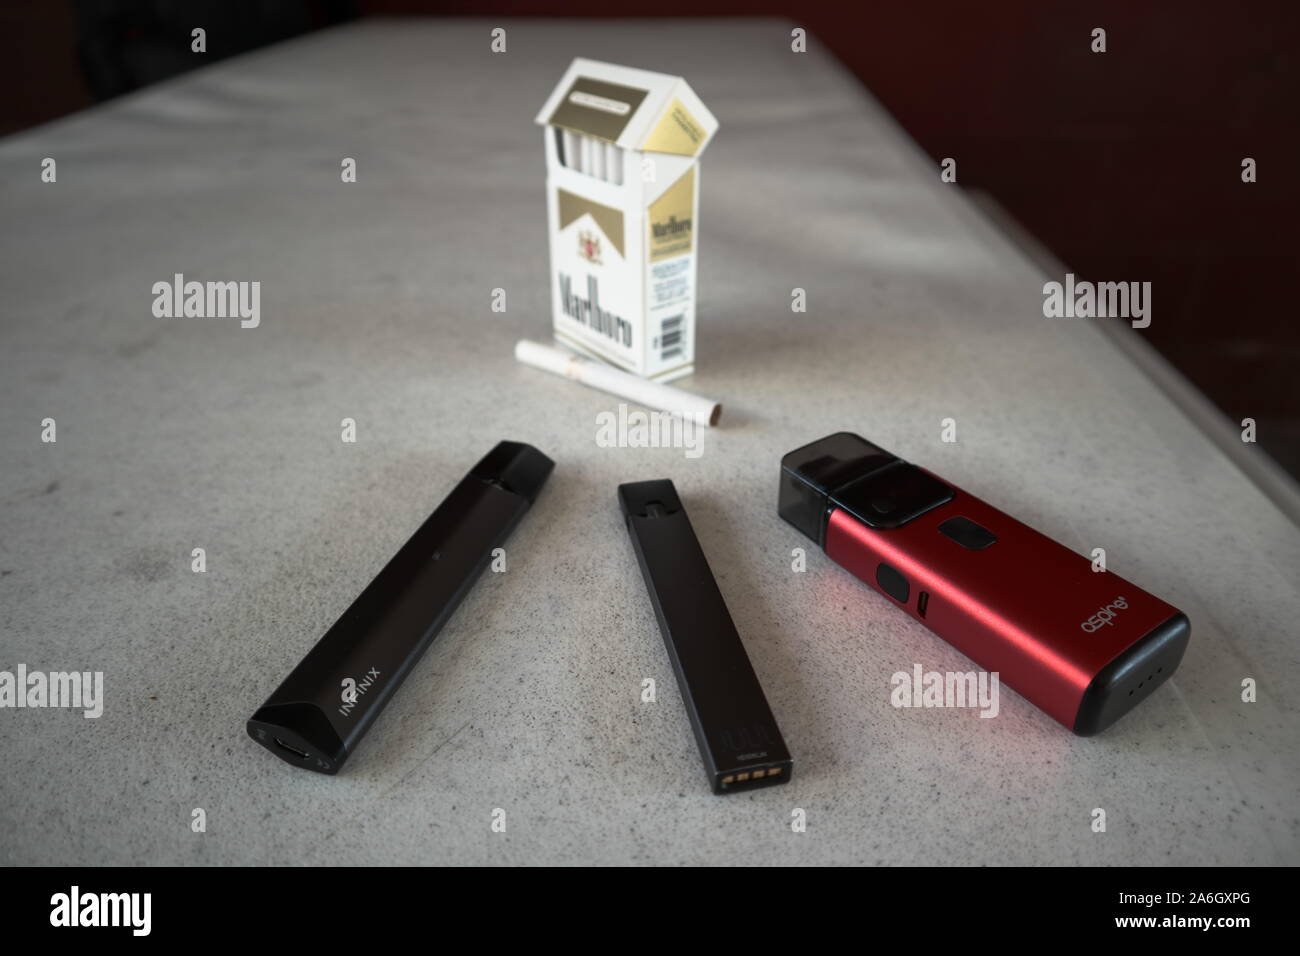 3 vapes juul, aspire breeze, smok infinix with a pack of marlboro cigarettes and one cigarette placed outside on a white textured table, isolated Stock Photo